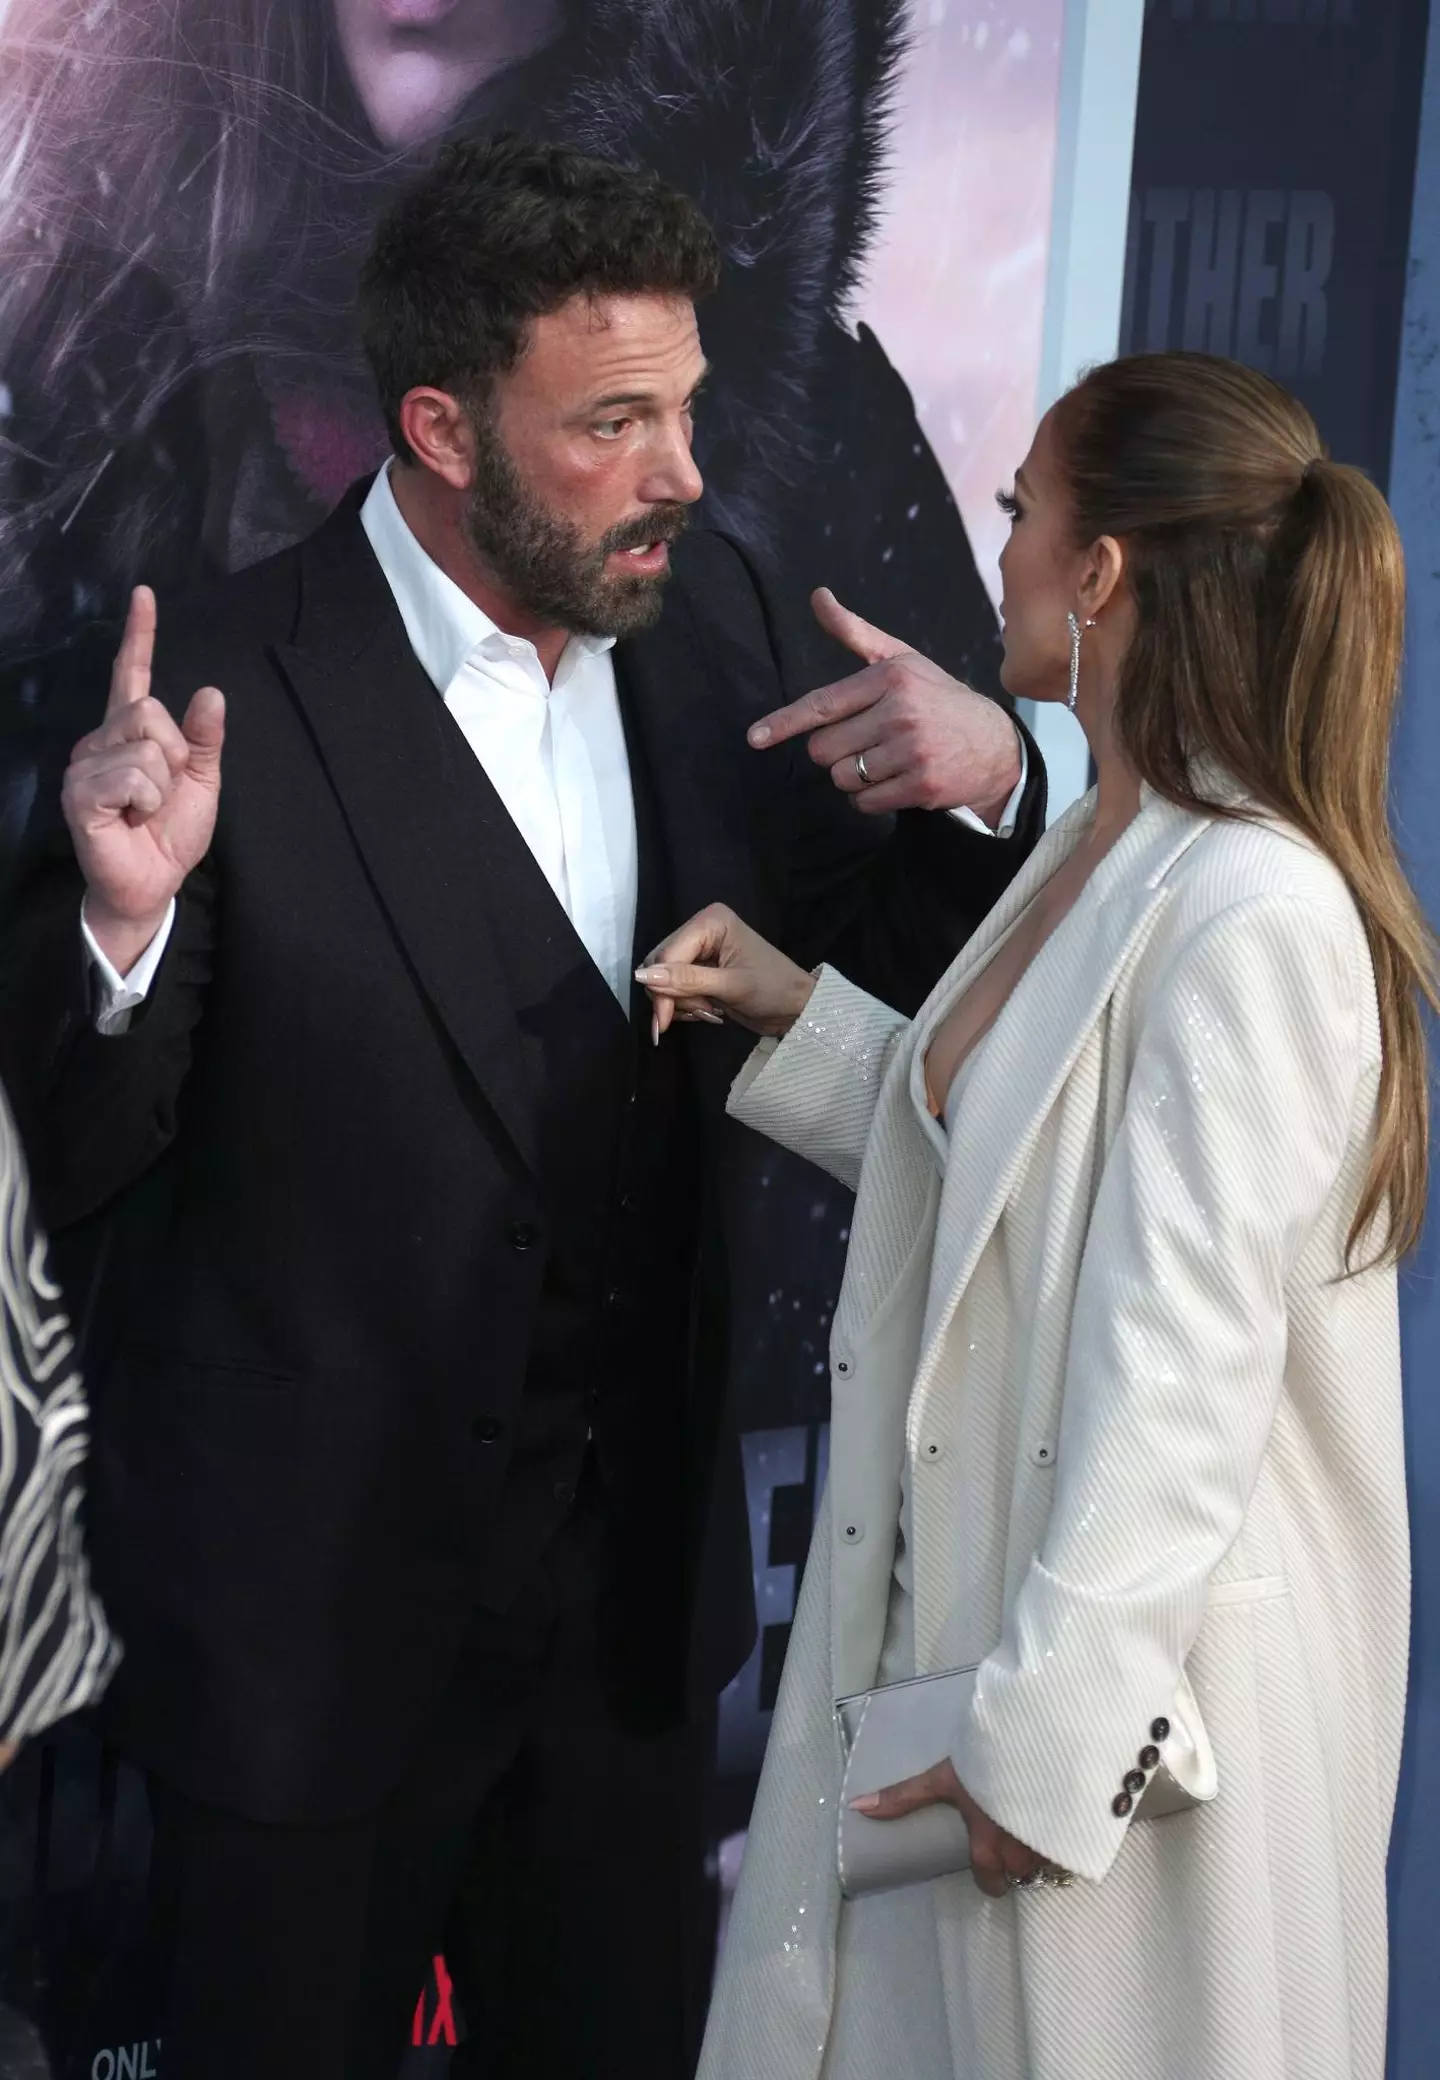 Ben Affleck and J-Lo seemed to be involved in some discussion.